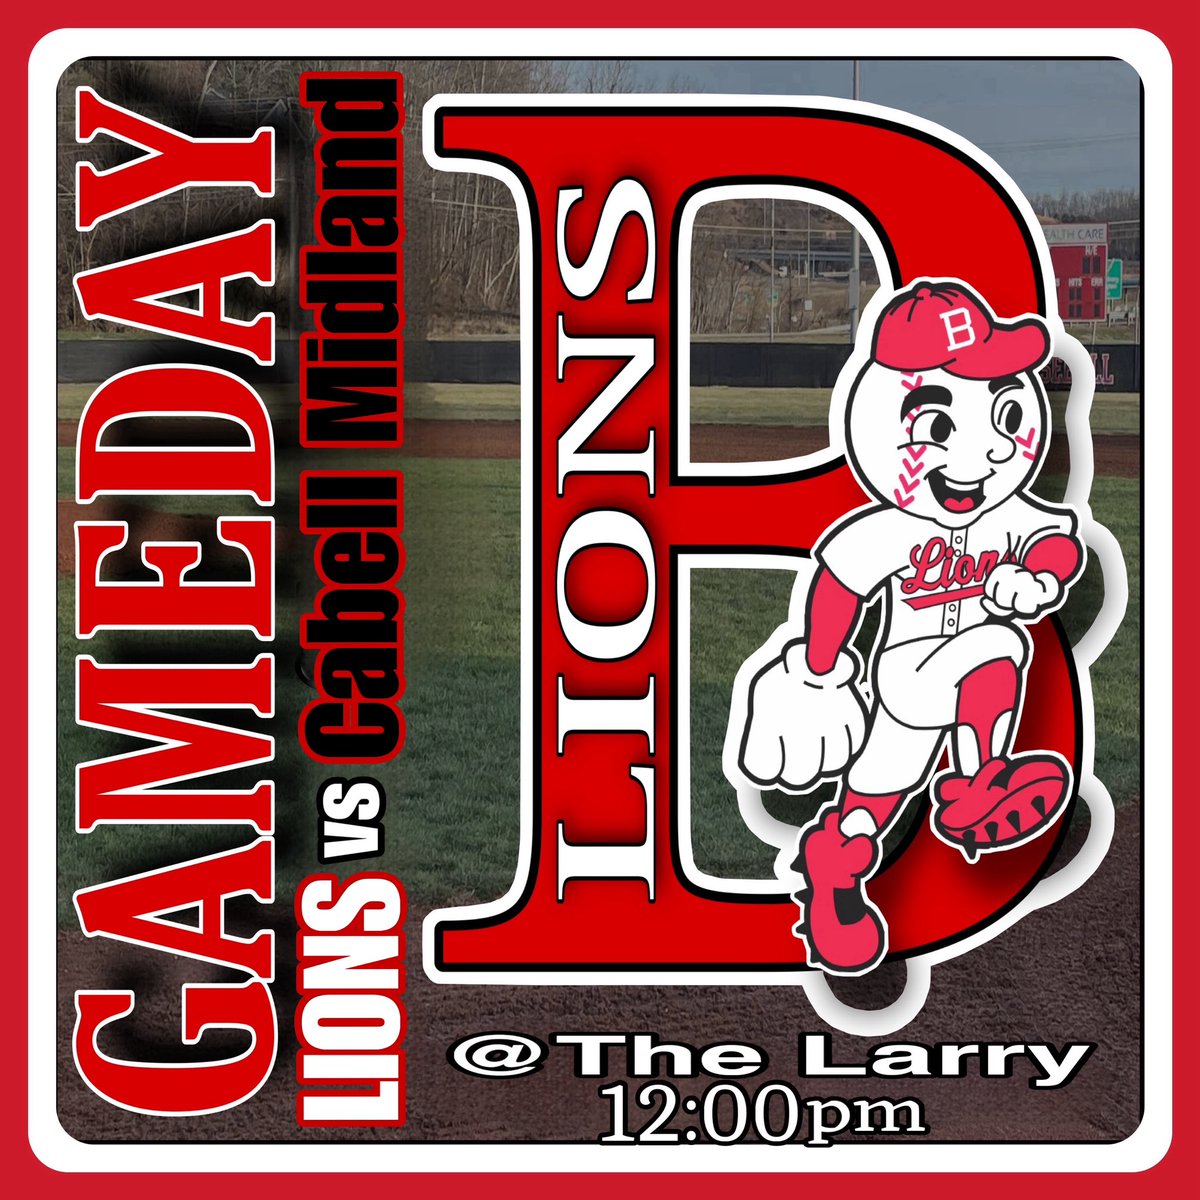 GAMEDAY: the Lions are trying to bounce back in the Win column today against another tough opponent. Cabell Midland comes to The Larry today at Noon! #CountyBoys